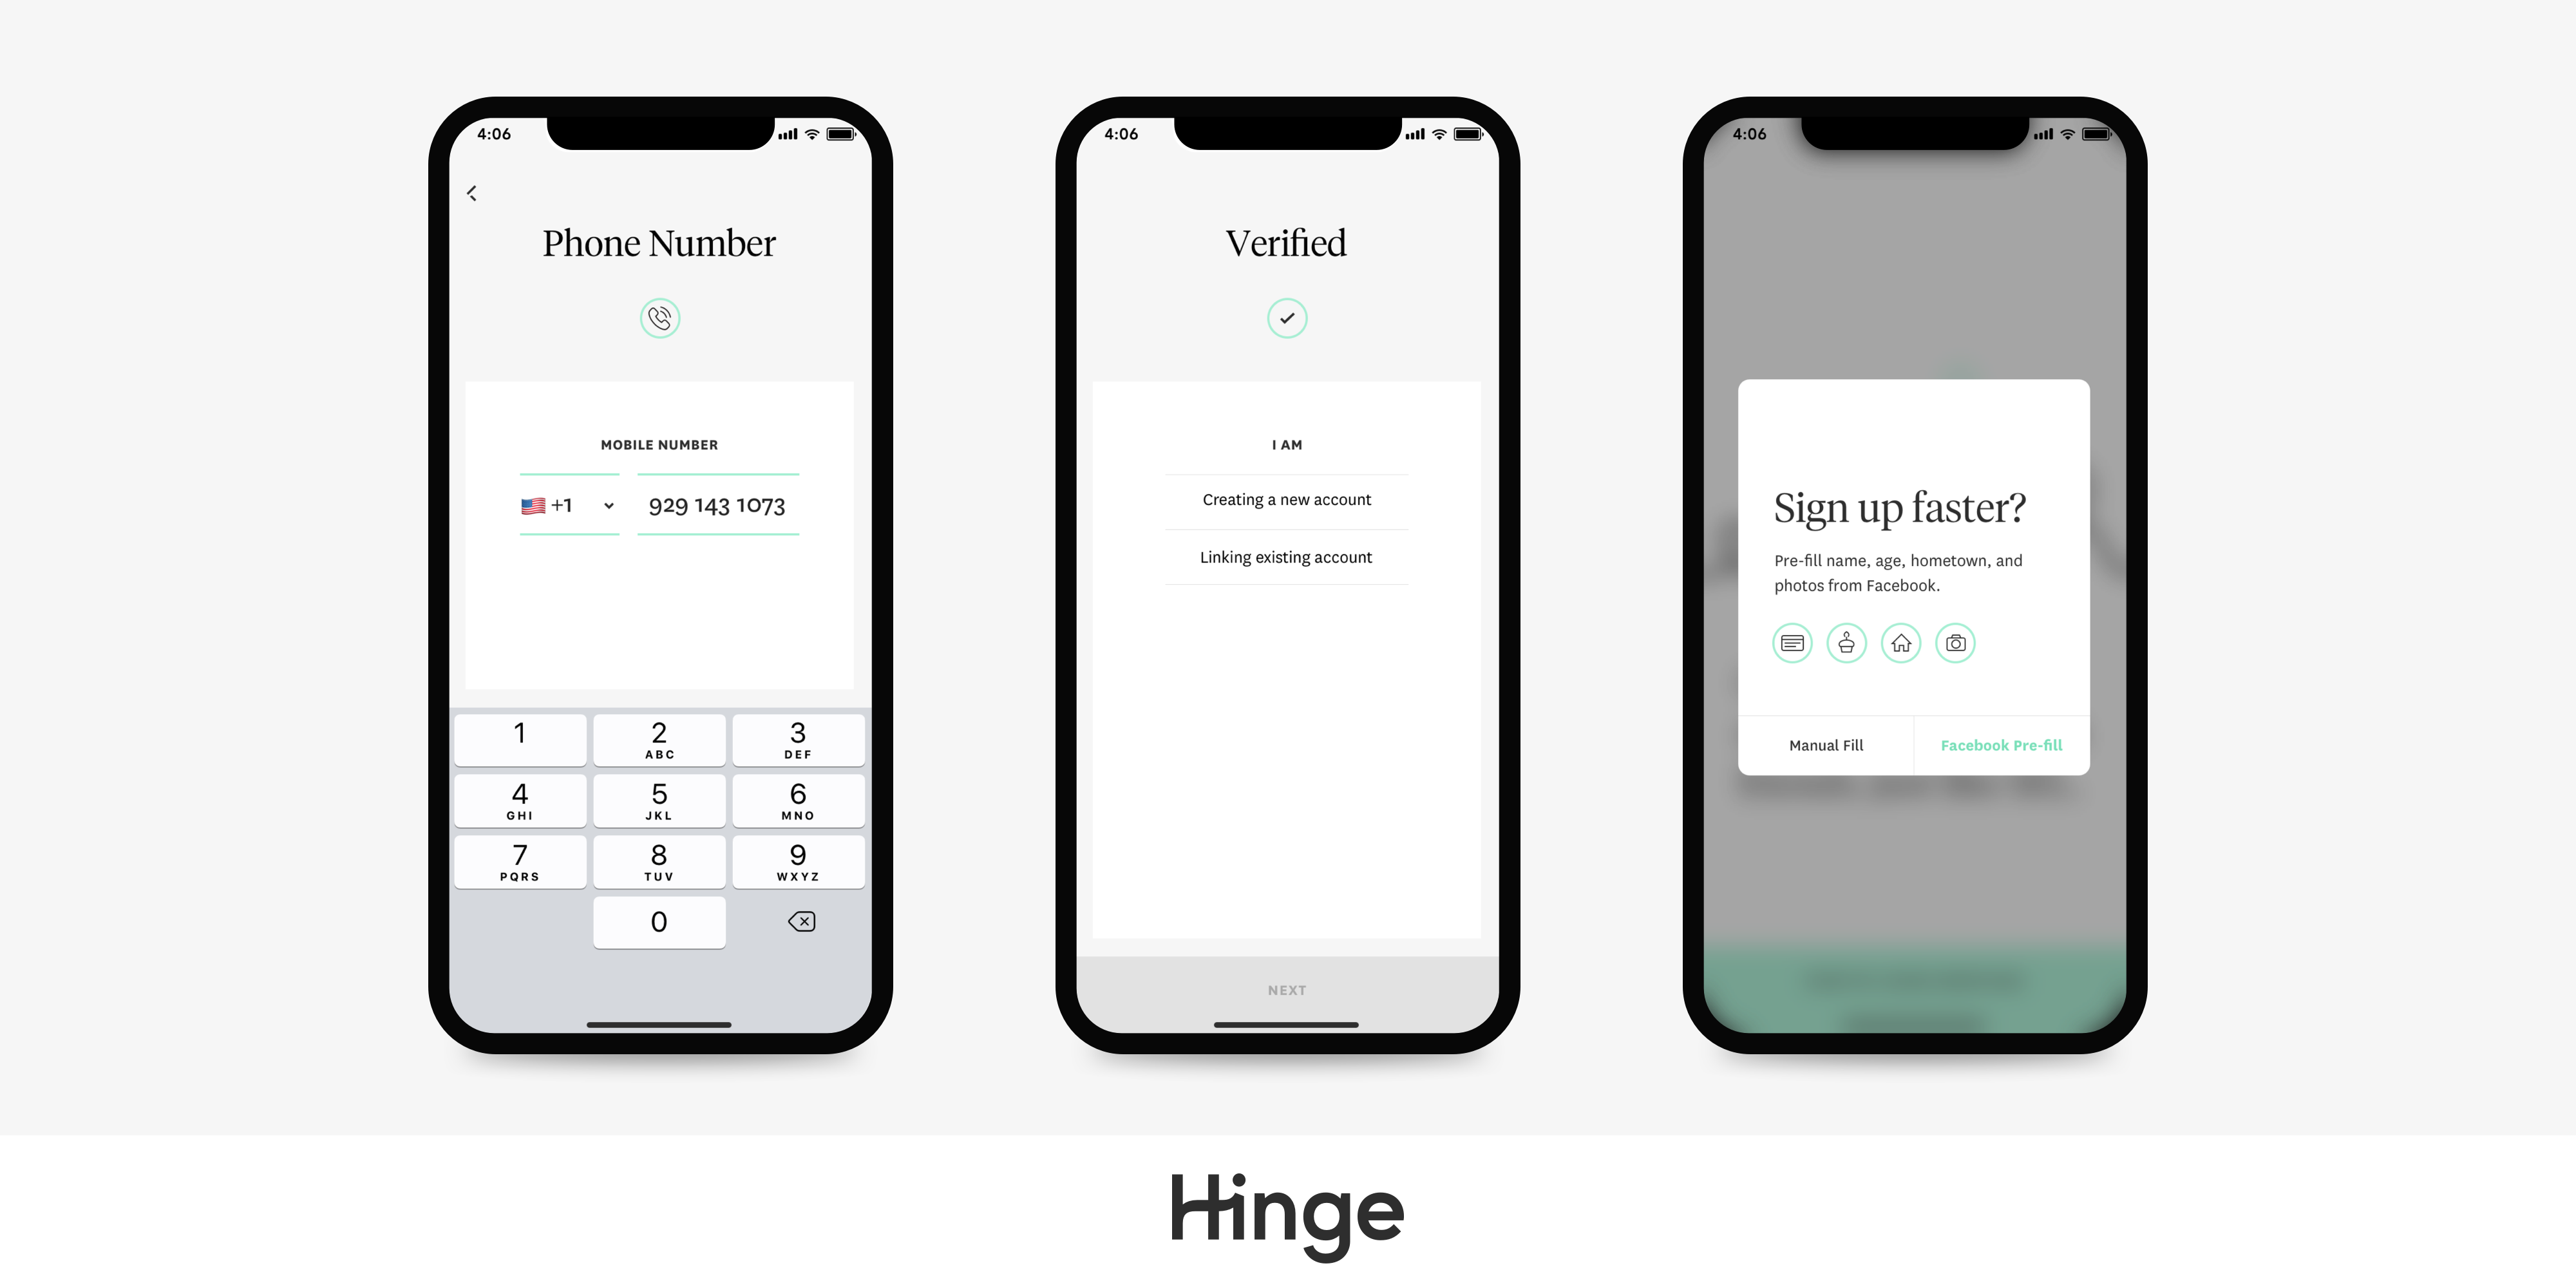 Dating app Hinge is ditching the Facebook login requirement 